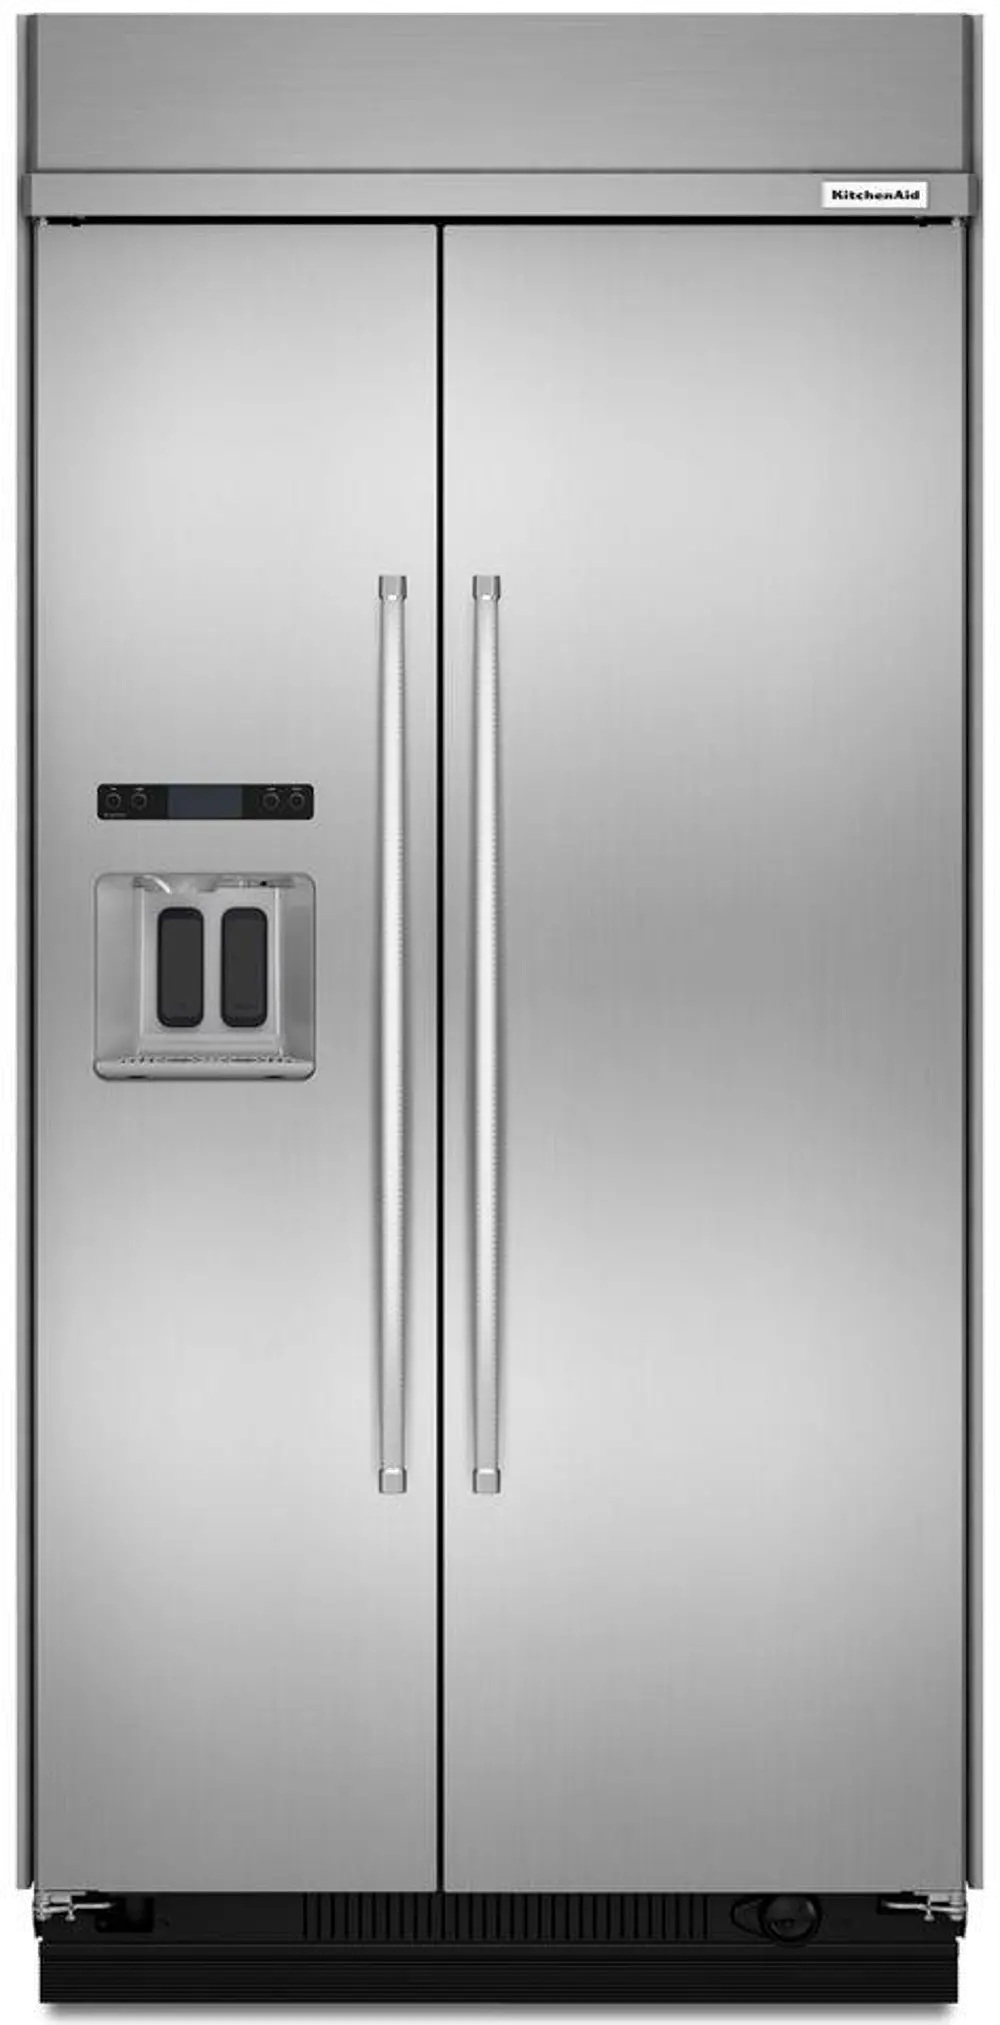 KBSD608ESS KitchenAid Built in Side by Side Refrigerator - 29.5 cu. ft., 48 Inch Stainless Steel-1